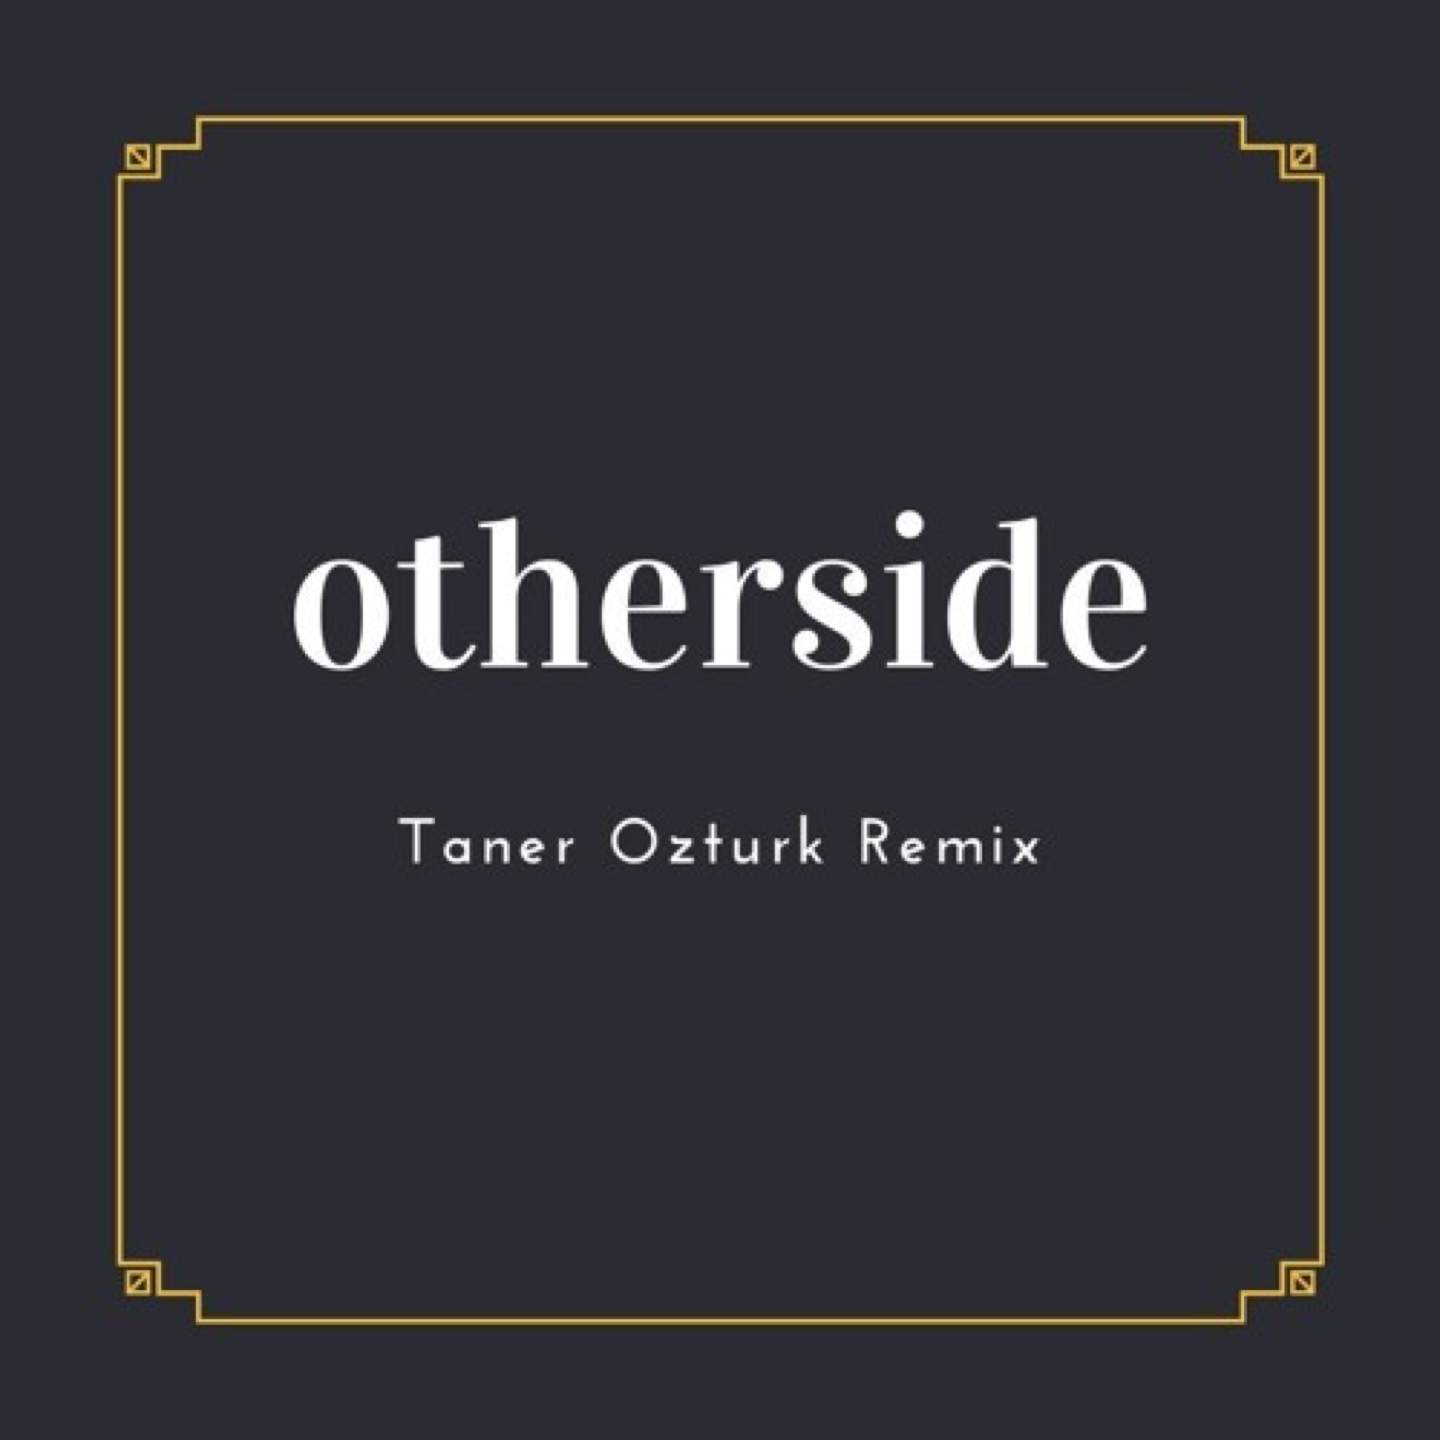 Otherside feat. Red Hot Chili Peppers - (Taner Ozturk Remix) -
                    Luxe radio